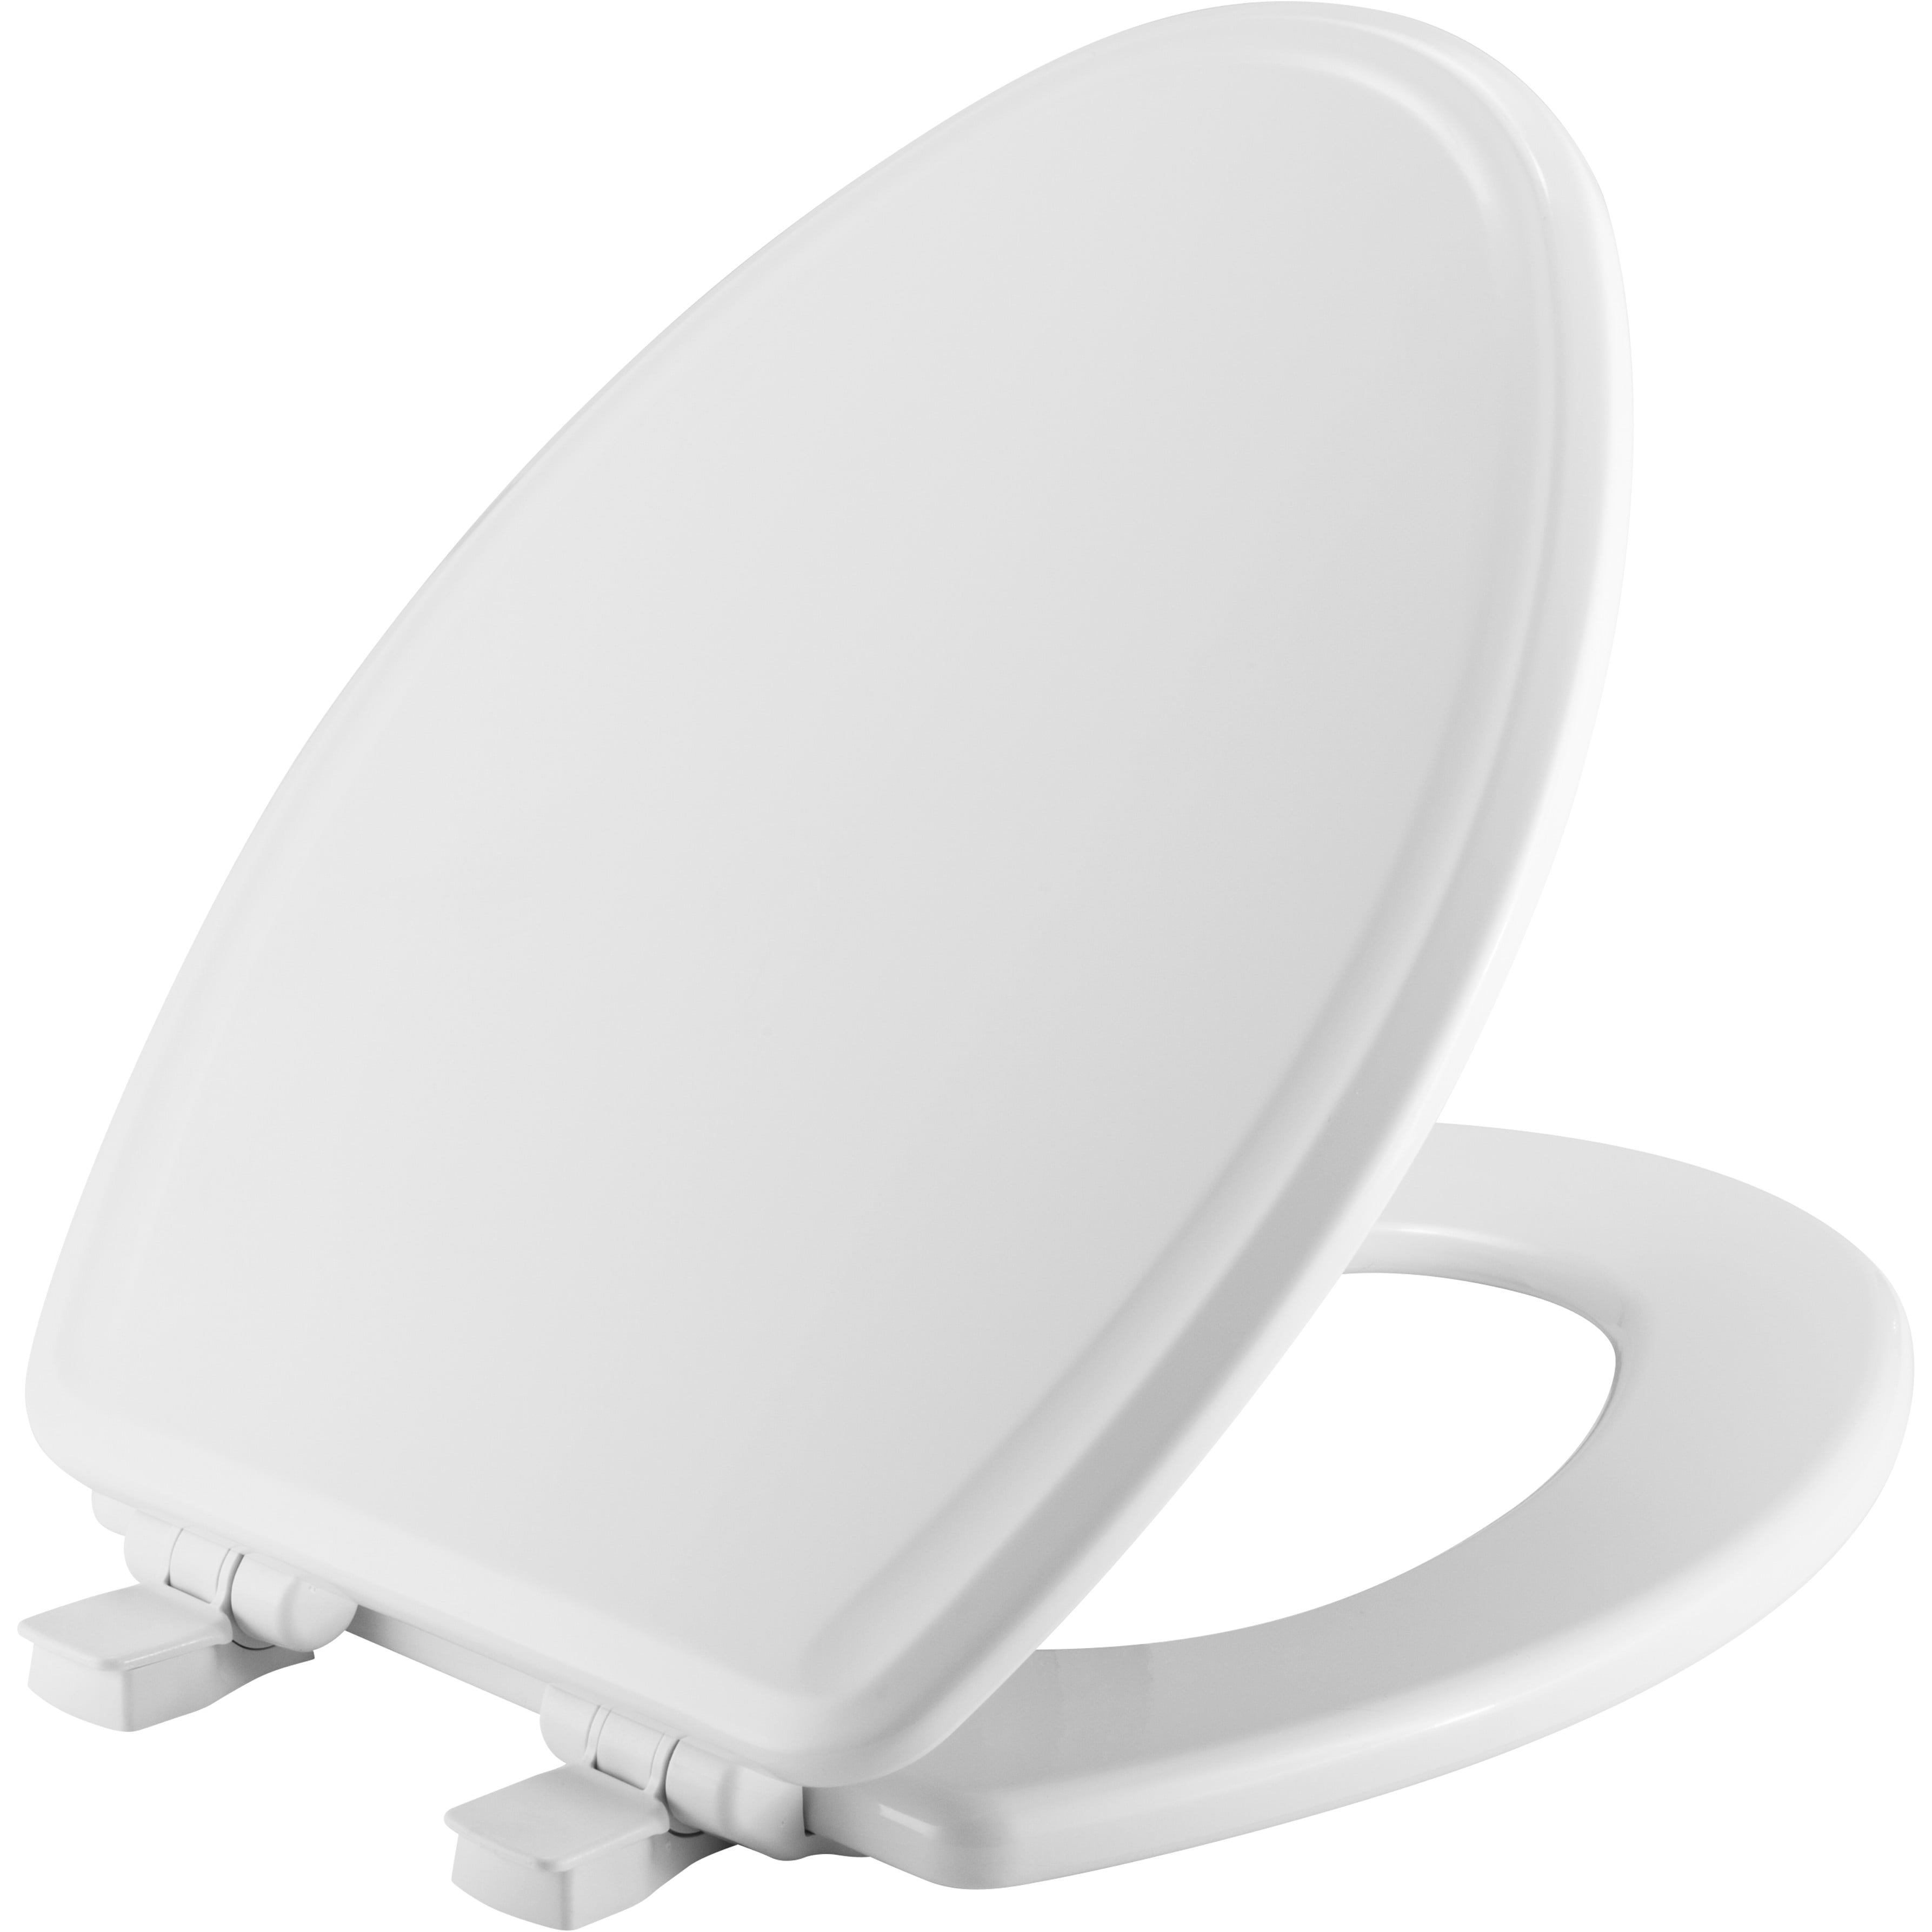 Mayfair Elongated Closed Front Slow-Close White Wood Toilet Seat 